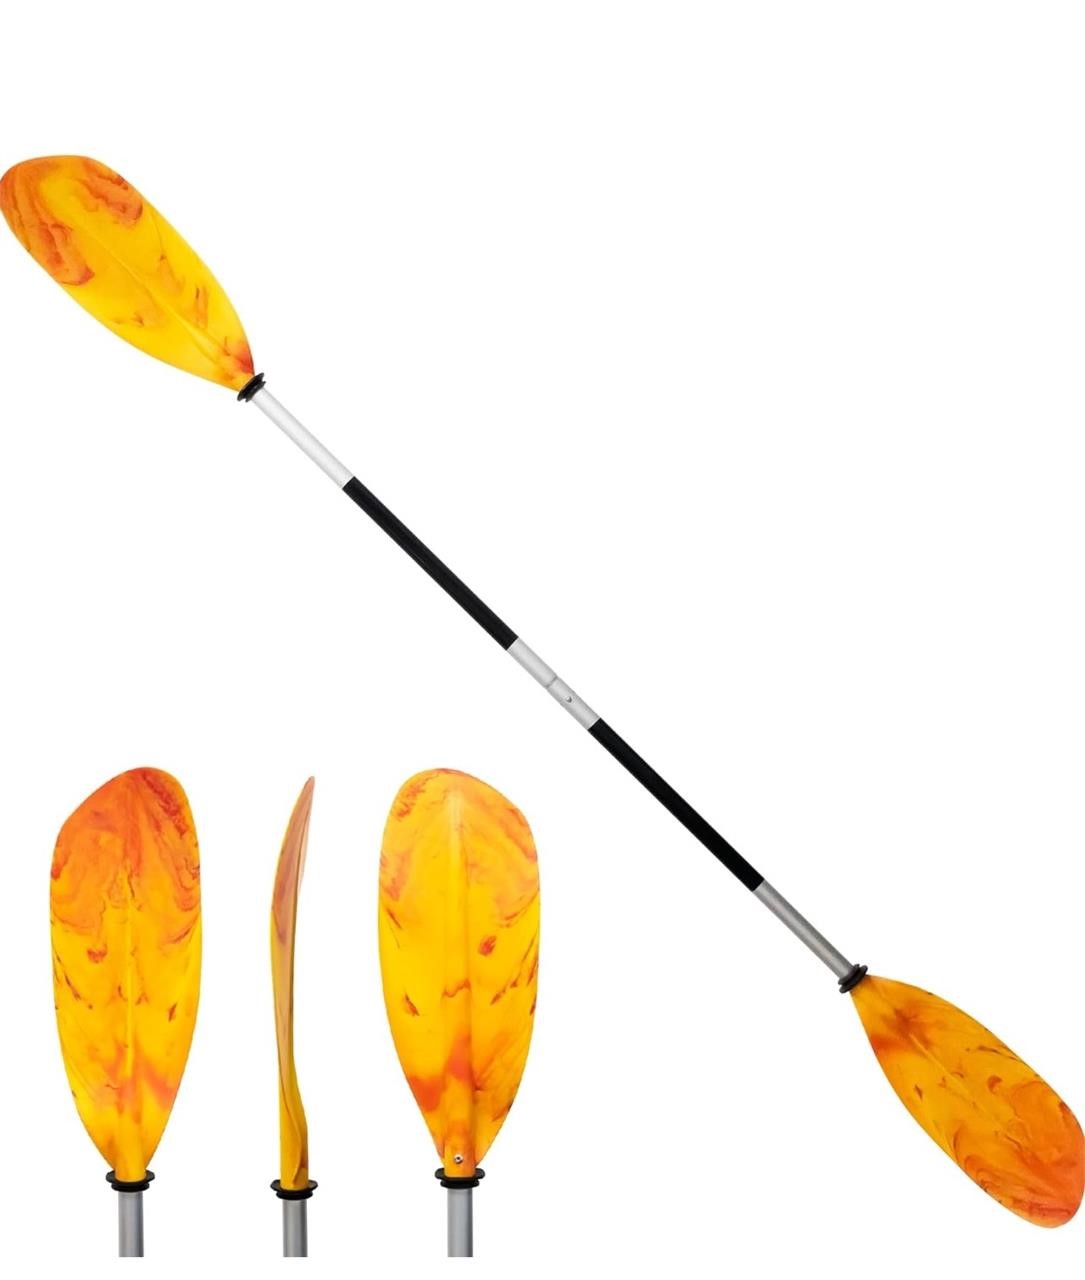 84" Kayak Paddle, 2 pieces for easy storage